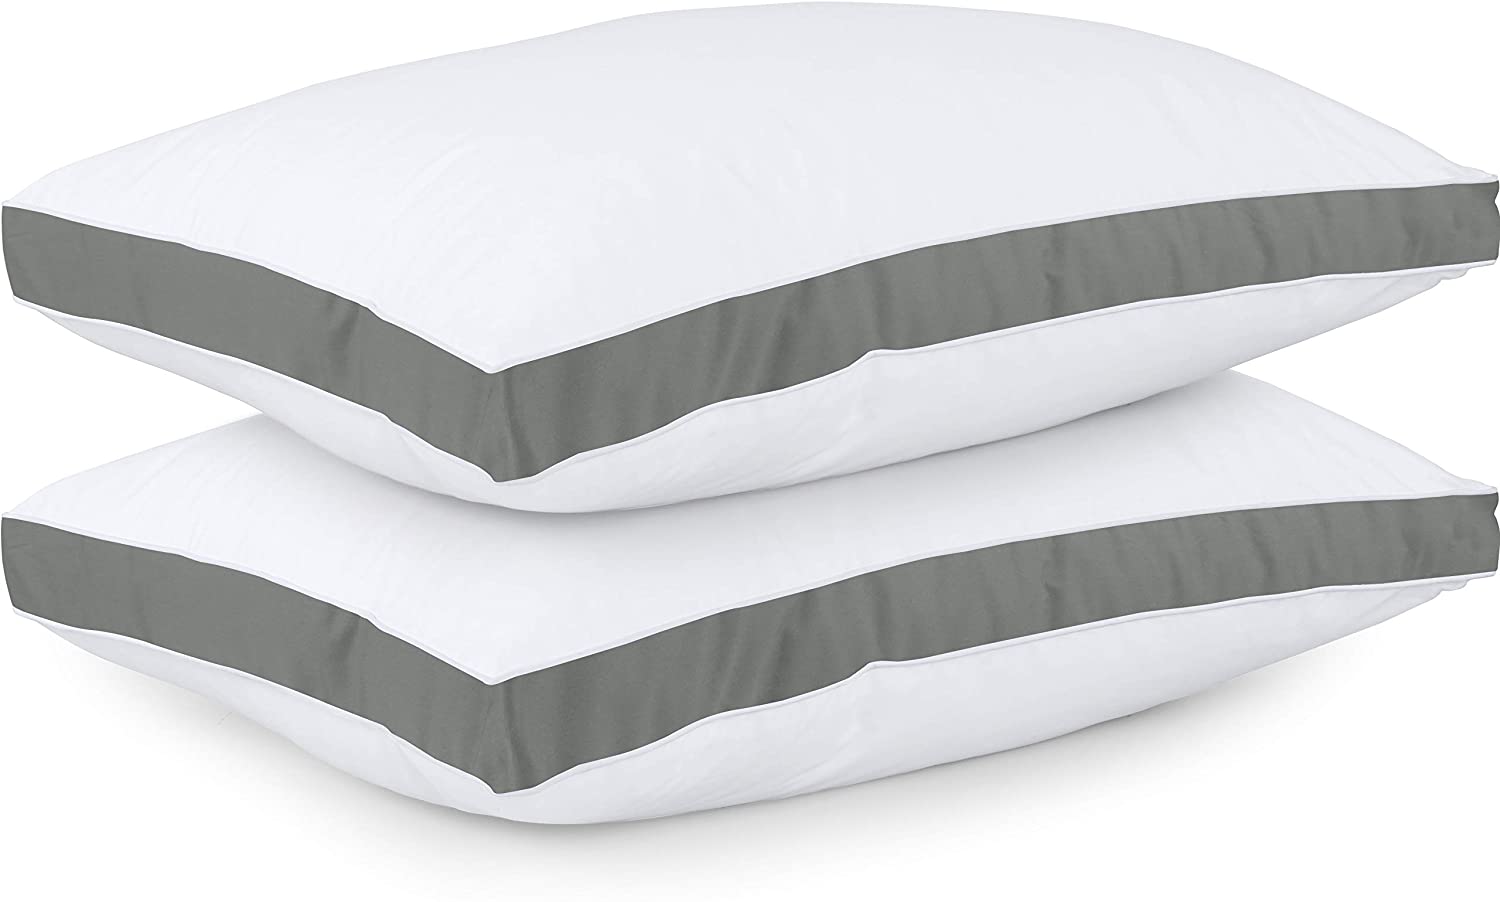 Utopia Bedding Throw Pillows Insert (Pack of 4, White) - 18 x 18 Inches Bed and